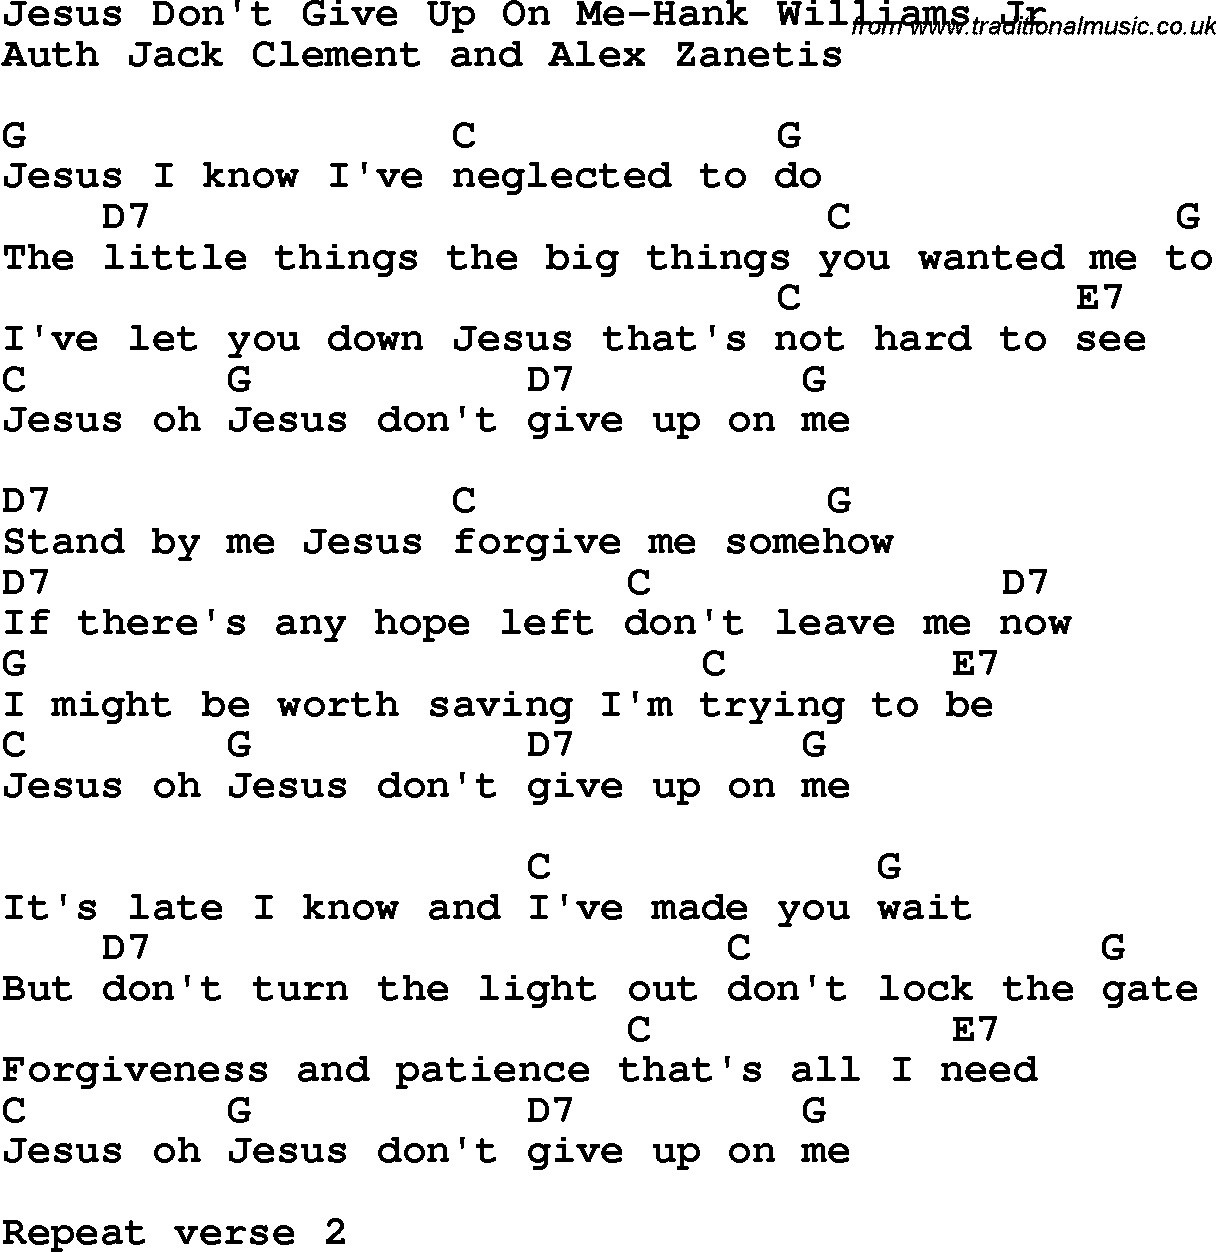 Country, Southern and Bluegrass Gospel Song Jesus Don't Give Up On Me-Hank Williams Jr lyrics and chords